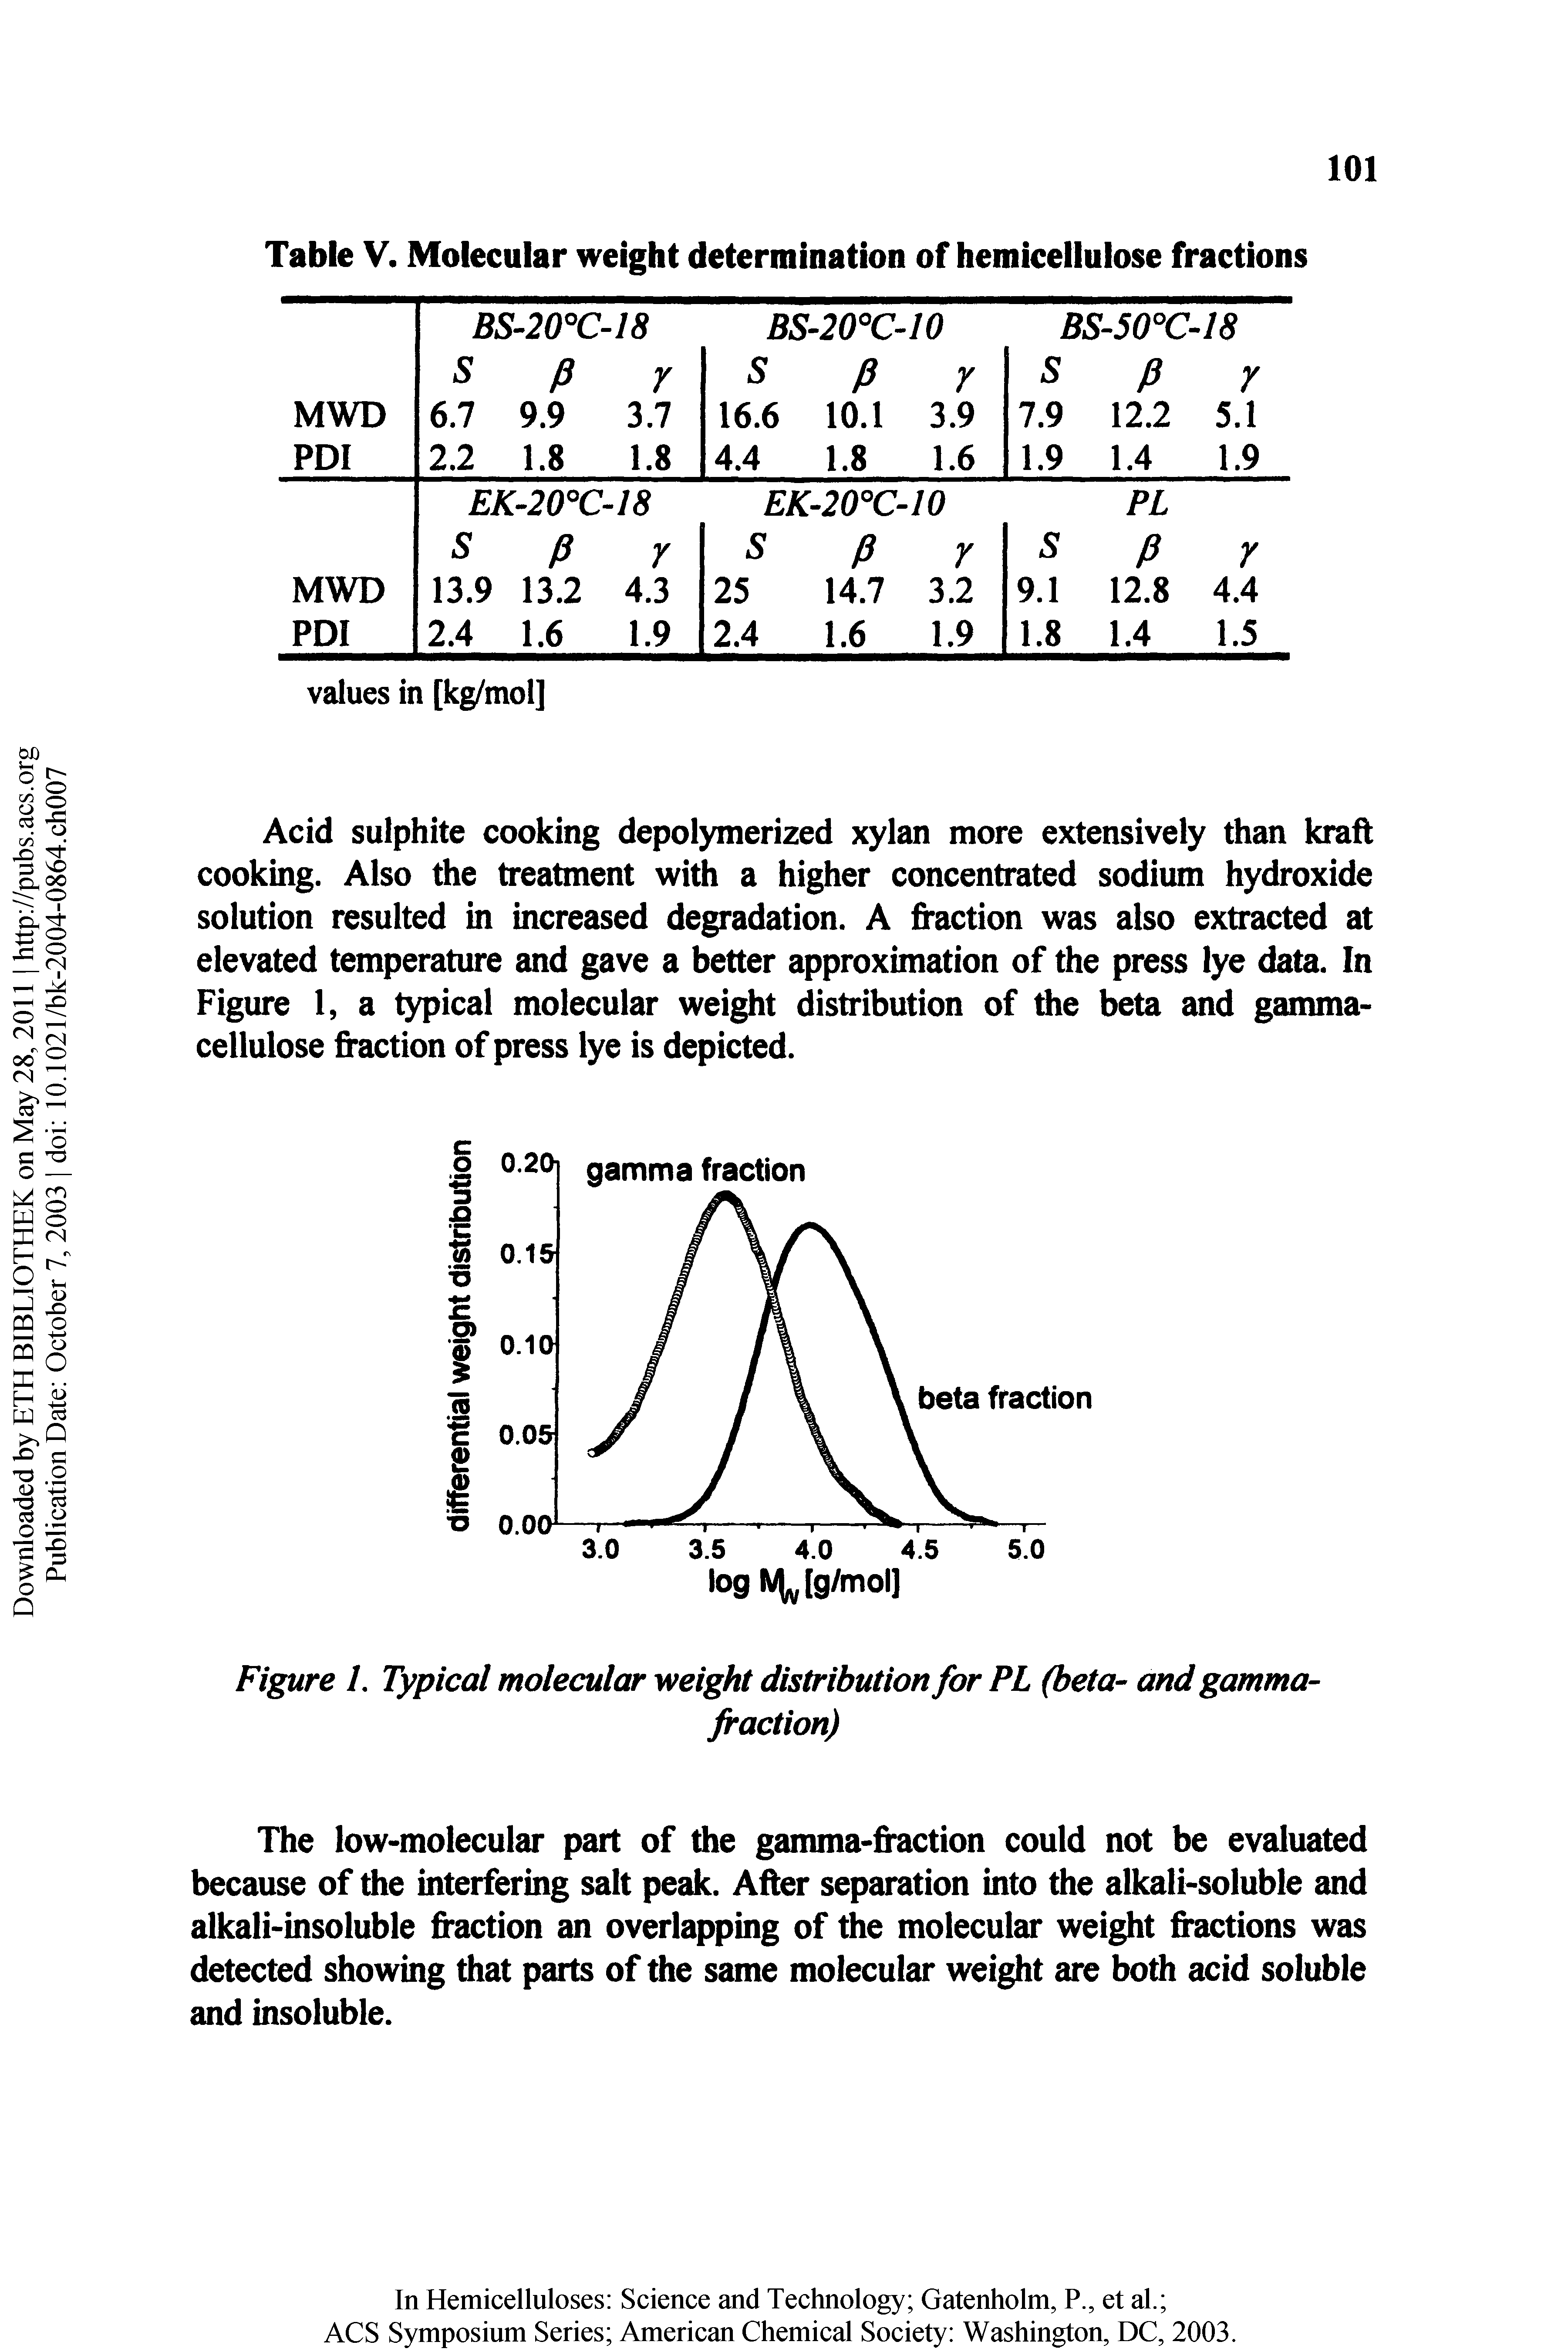 Table V. Molecular weight determination of hemicellulose fractions...